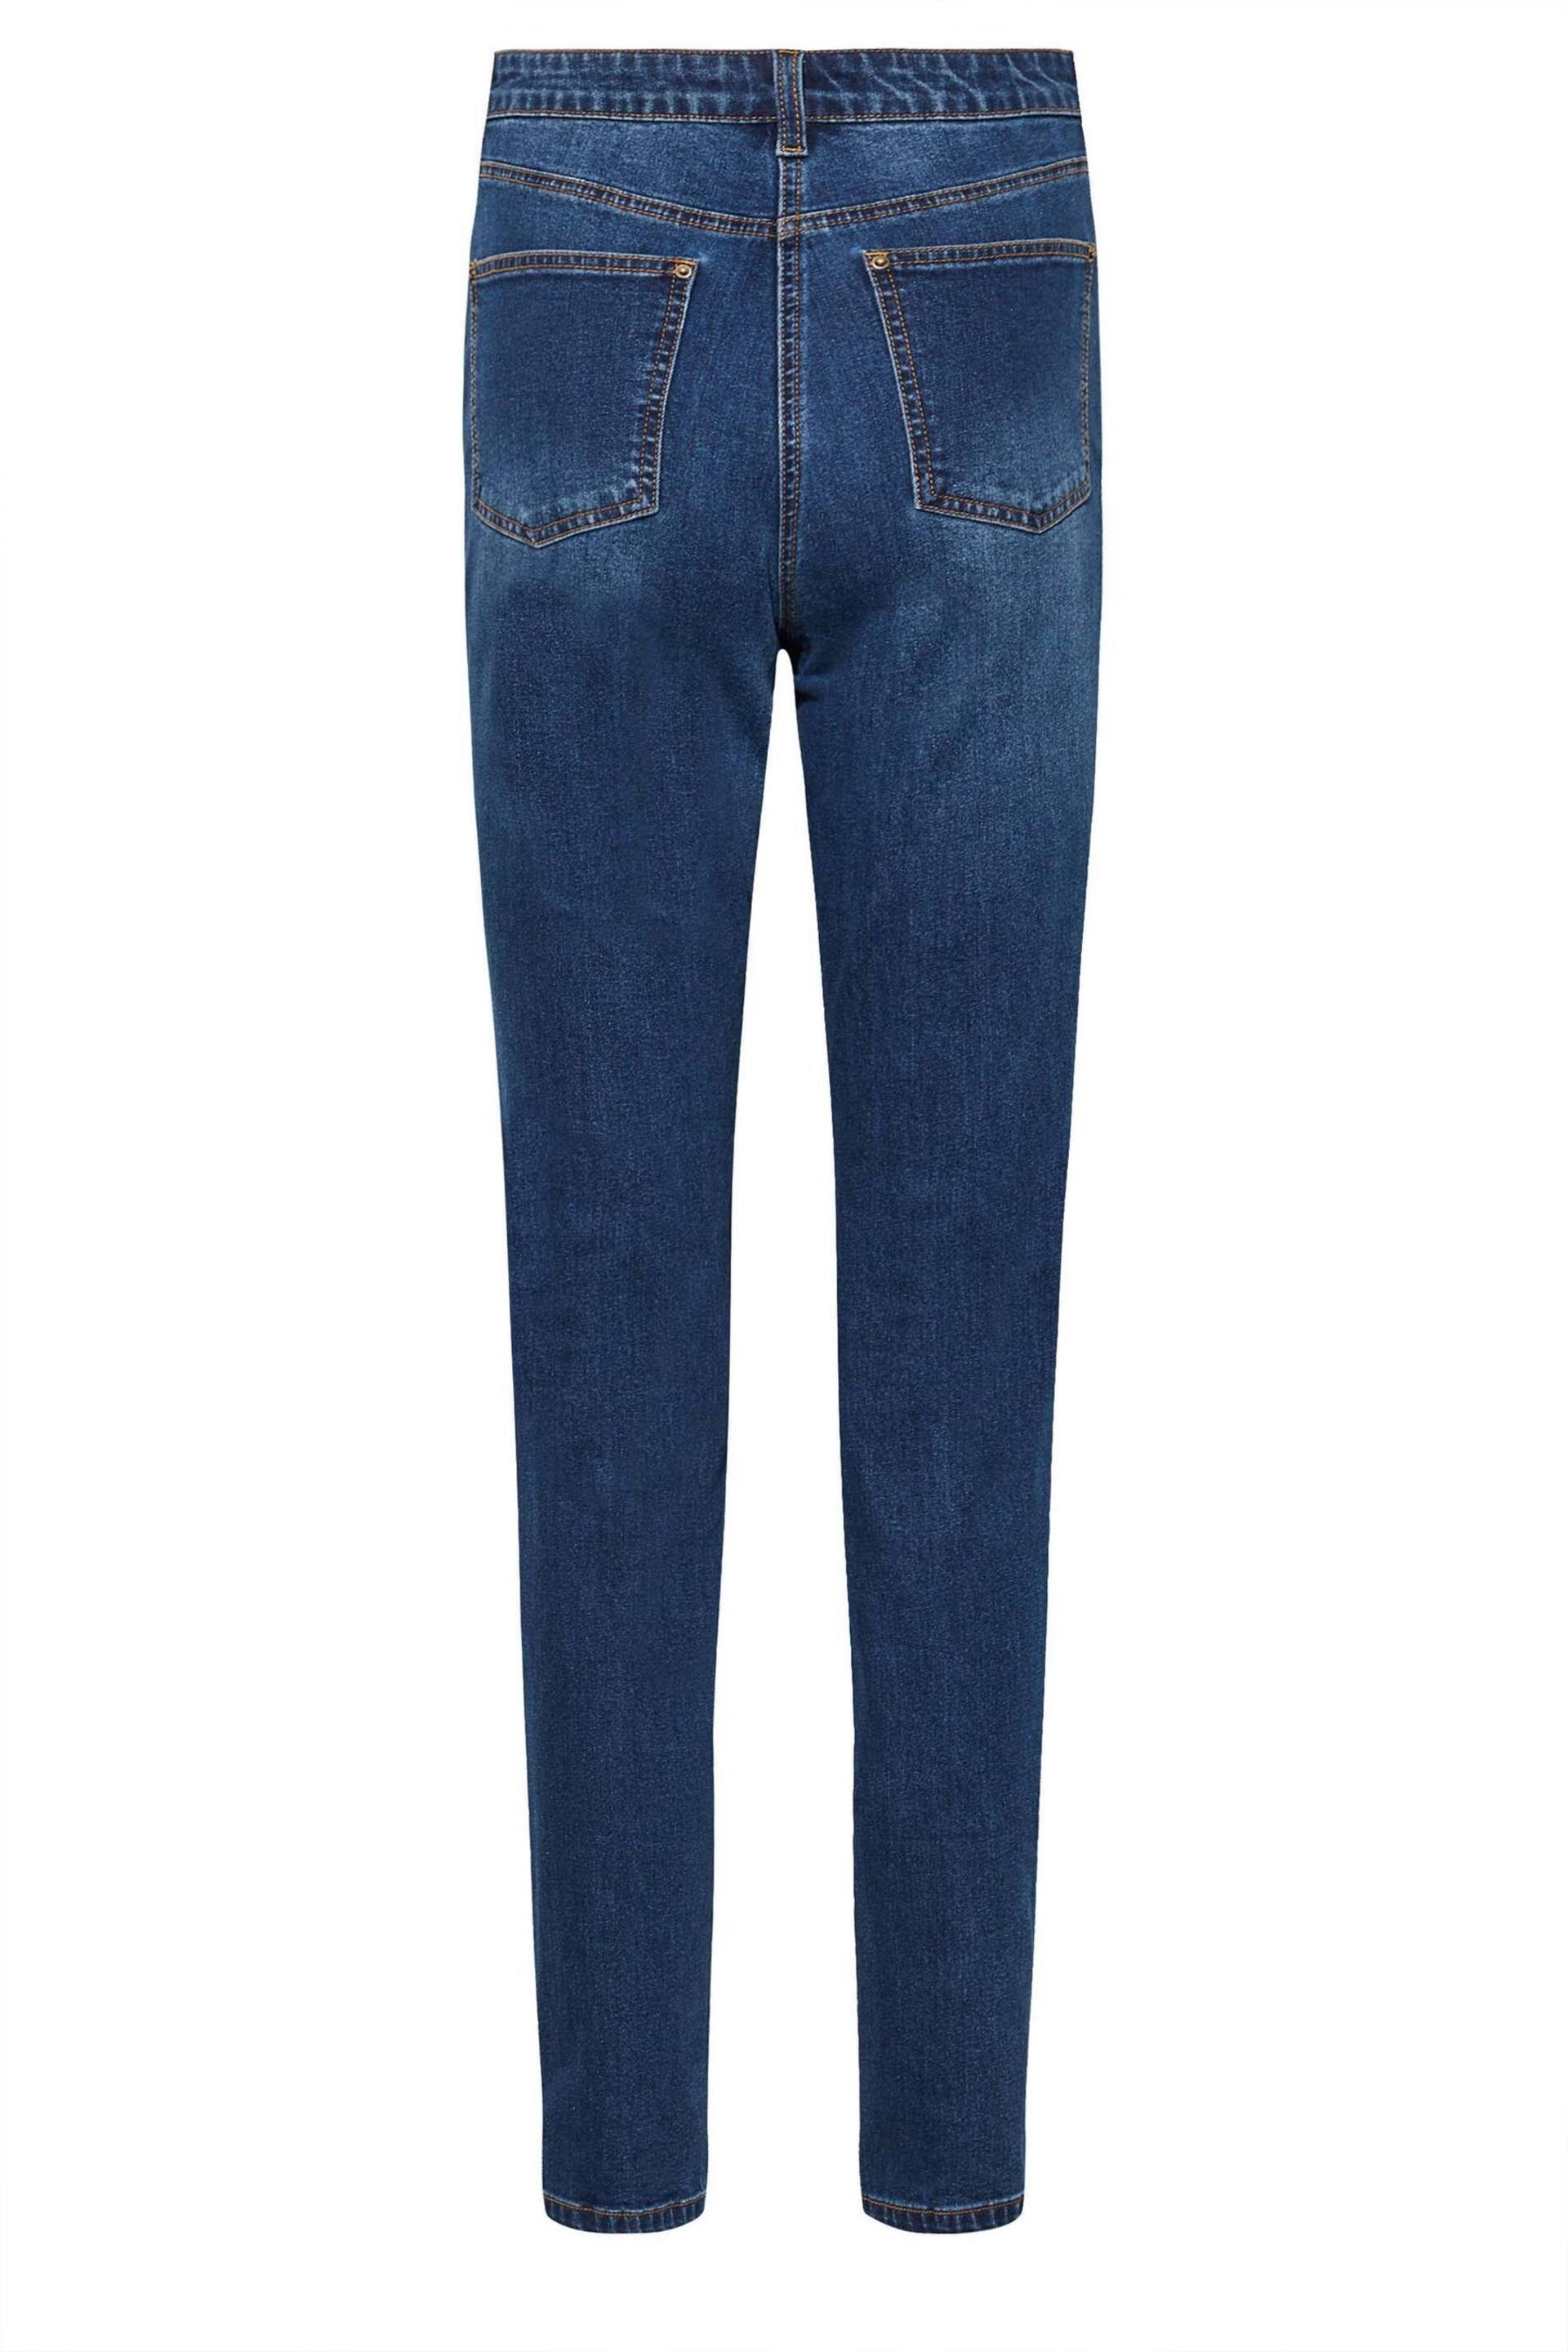 Long Tall Sally Blue UNA Stretch Mom Jeans - Image 4 of 4